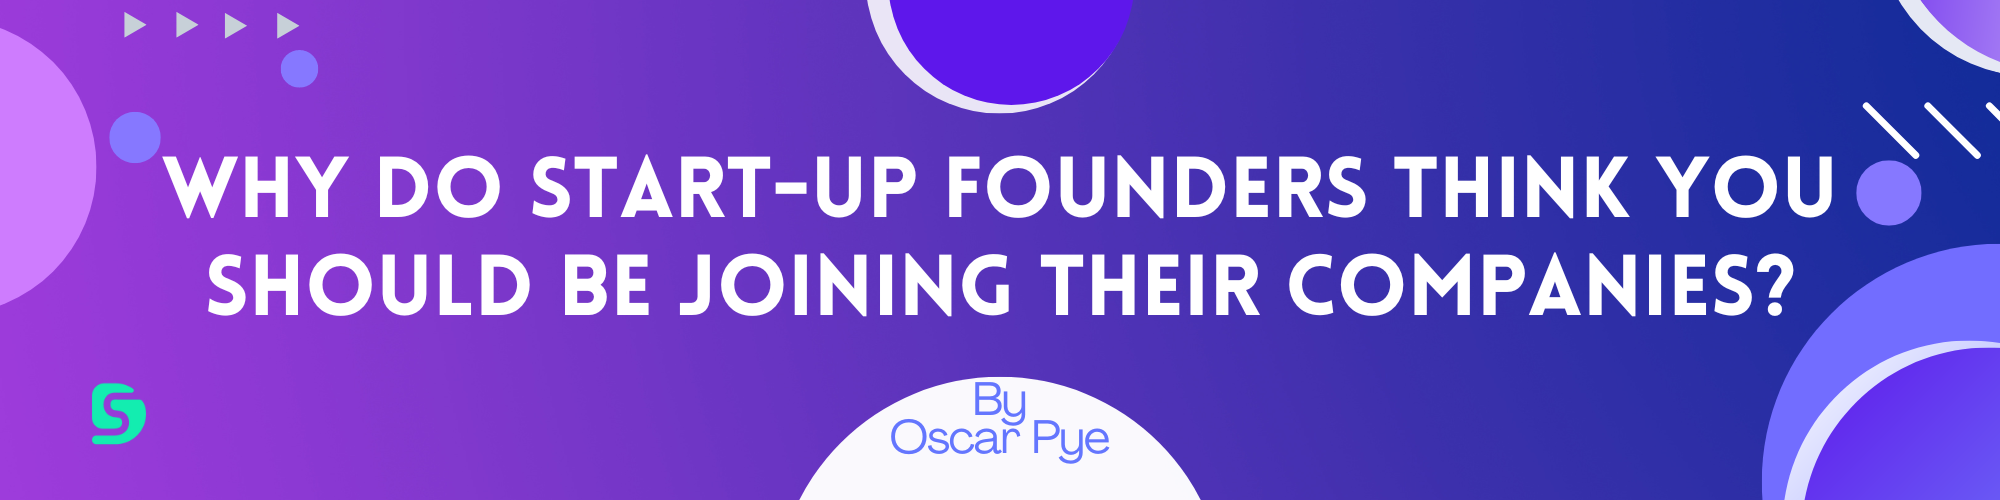 Why Do Start-up Founders Think You Should be Joining their Companies?